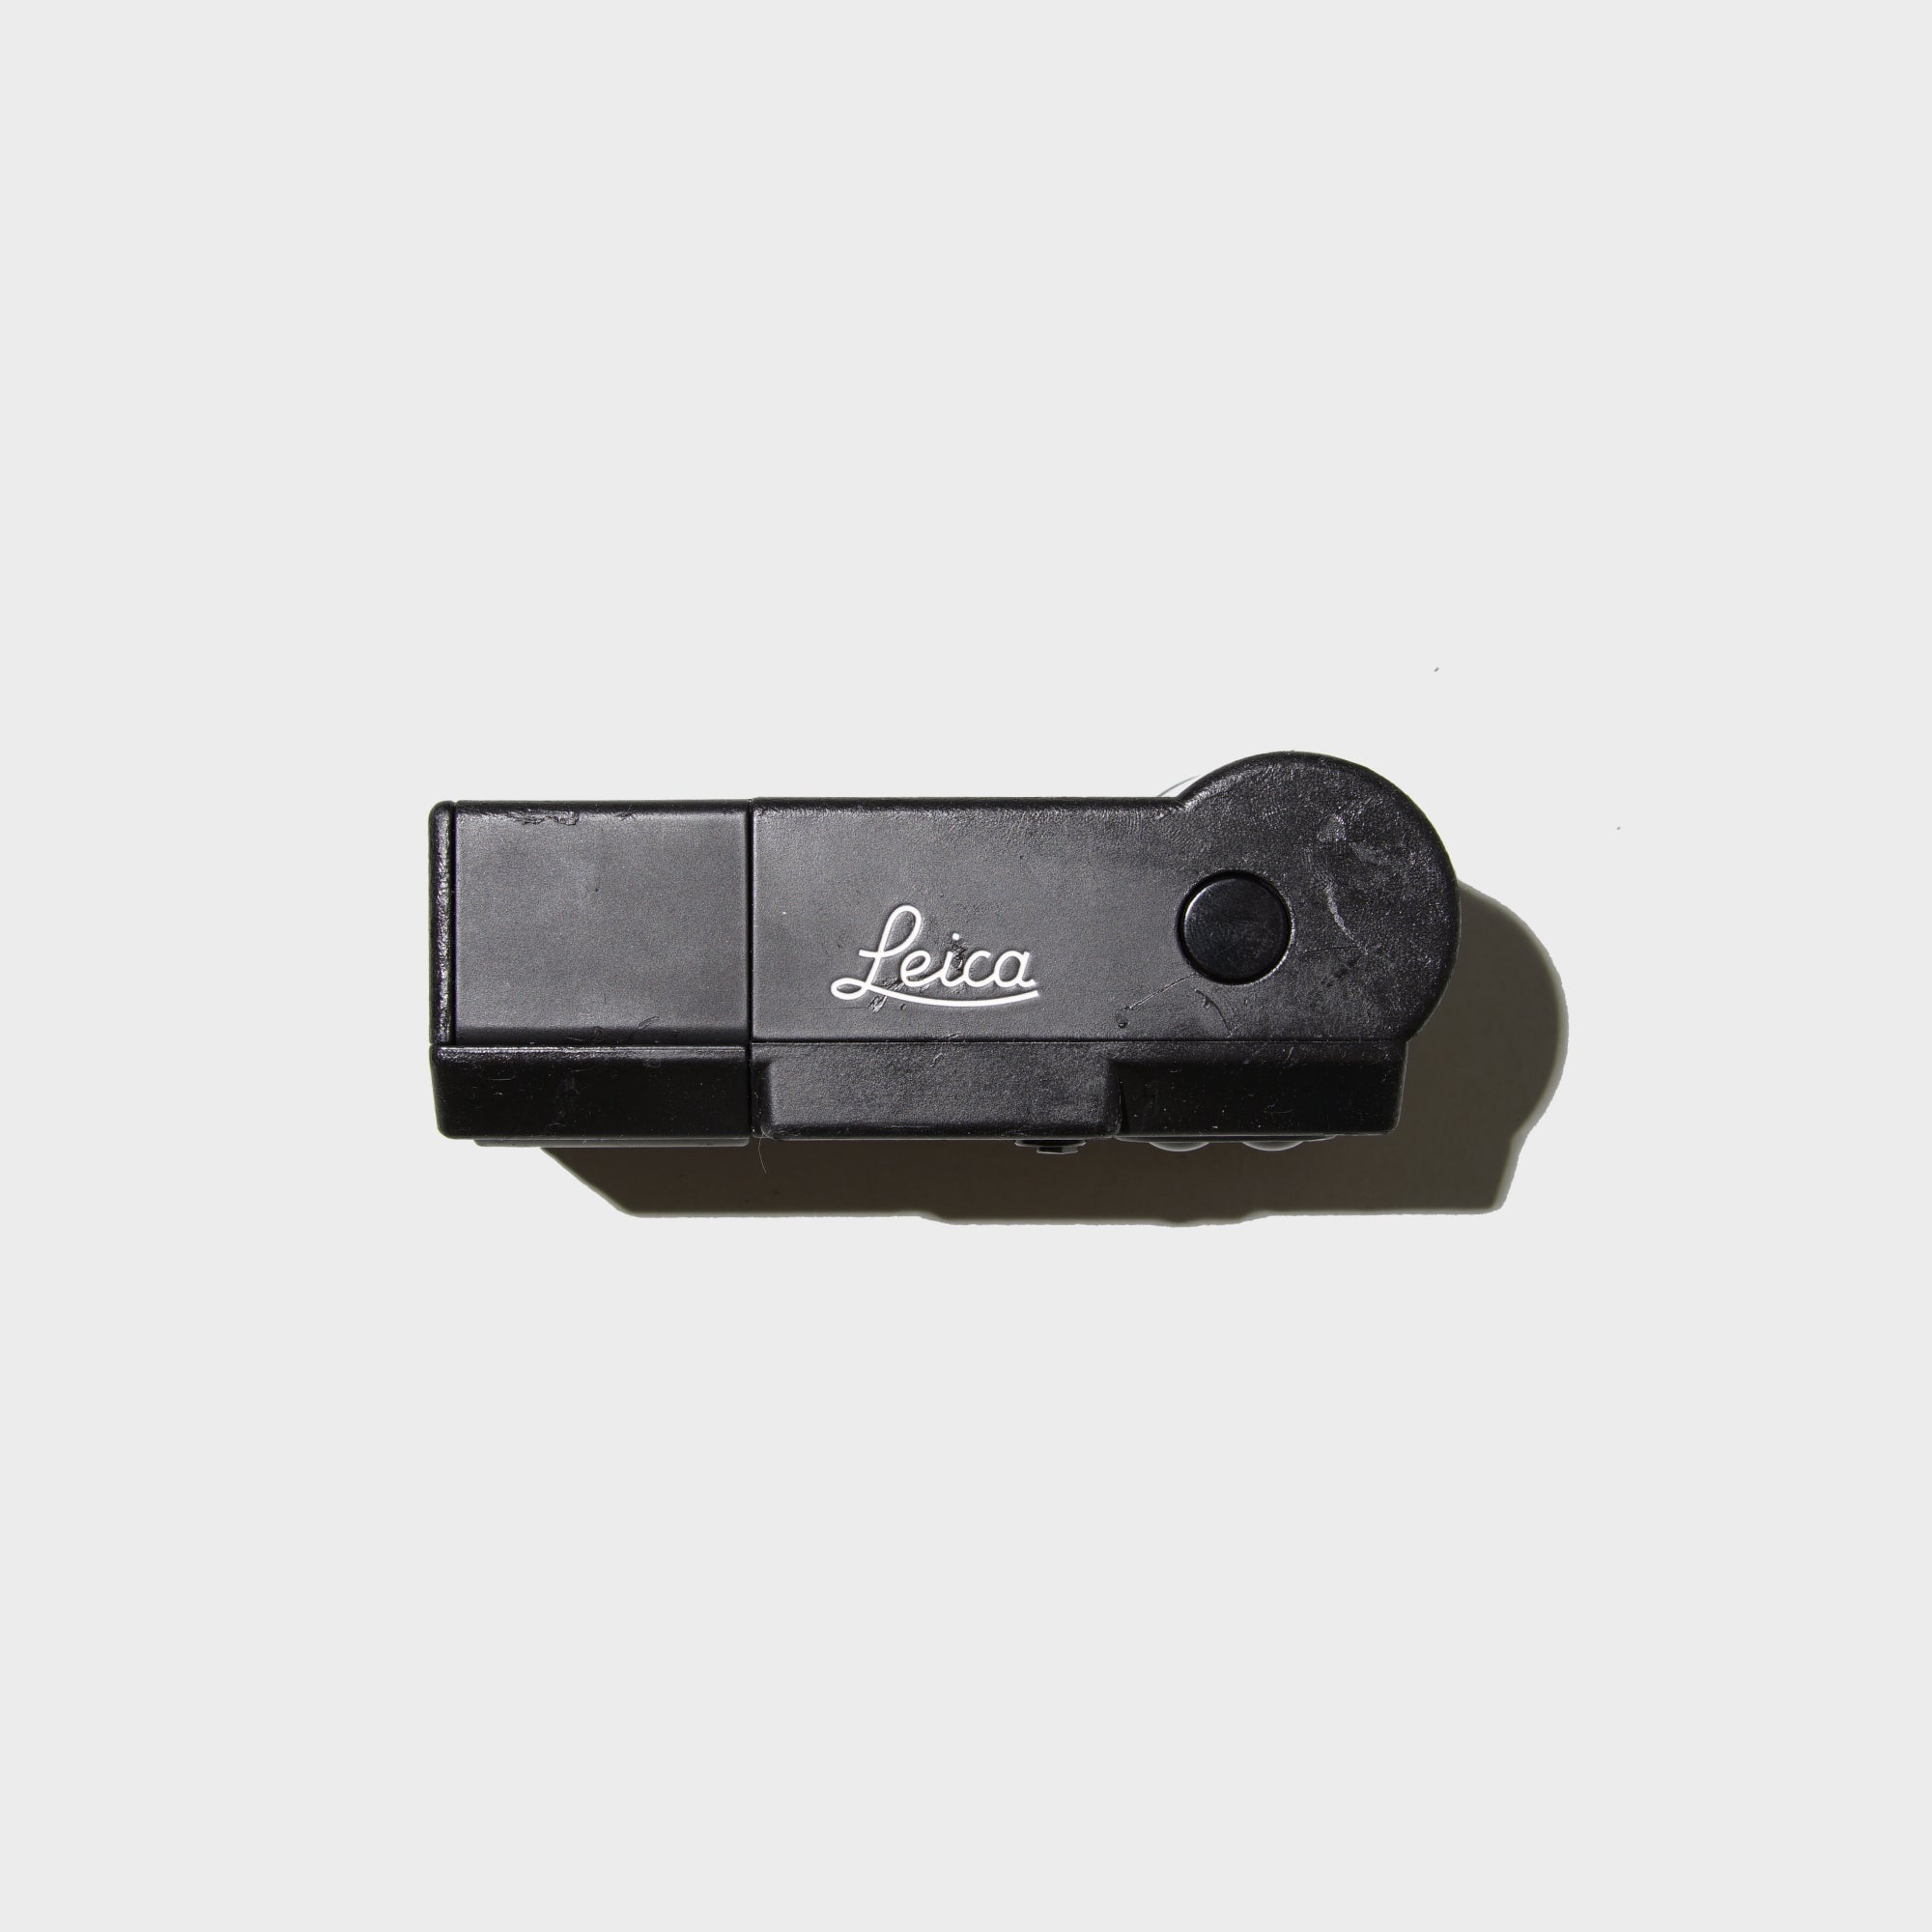 Buy Leica C11 Silver now at Analogue Amsterdam